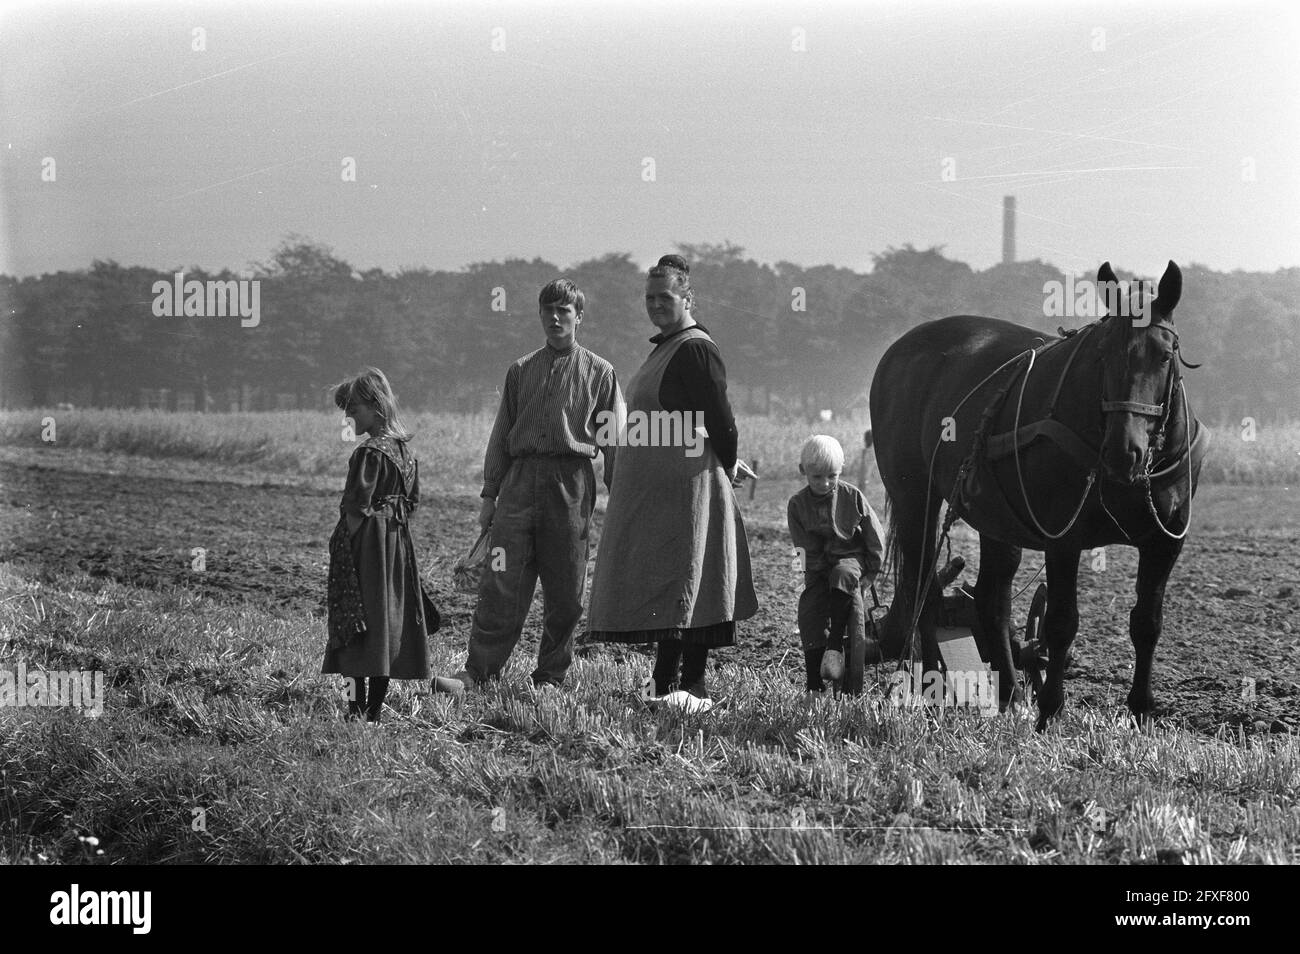 TV recordings for series Bartje, Jaap Schadenberg as Bartje with stepmother and brother and sister by horse, August 31, 1972, TV recordings, The Netherlands, 20th century press agency photo, news to remember, documentary, historic photography 1945-1990, visual stories, human history of the Twentieth Century, capturing moments in time Stock Photo